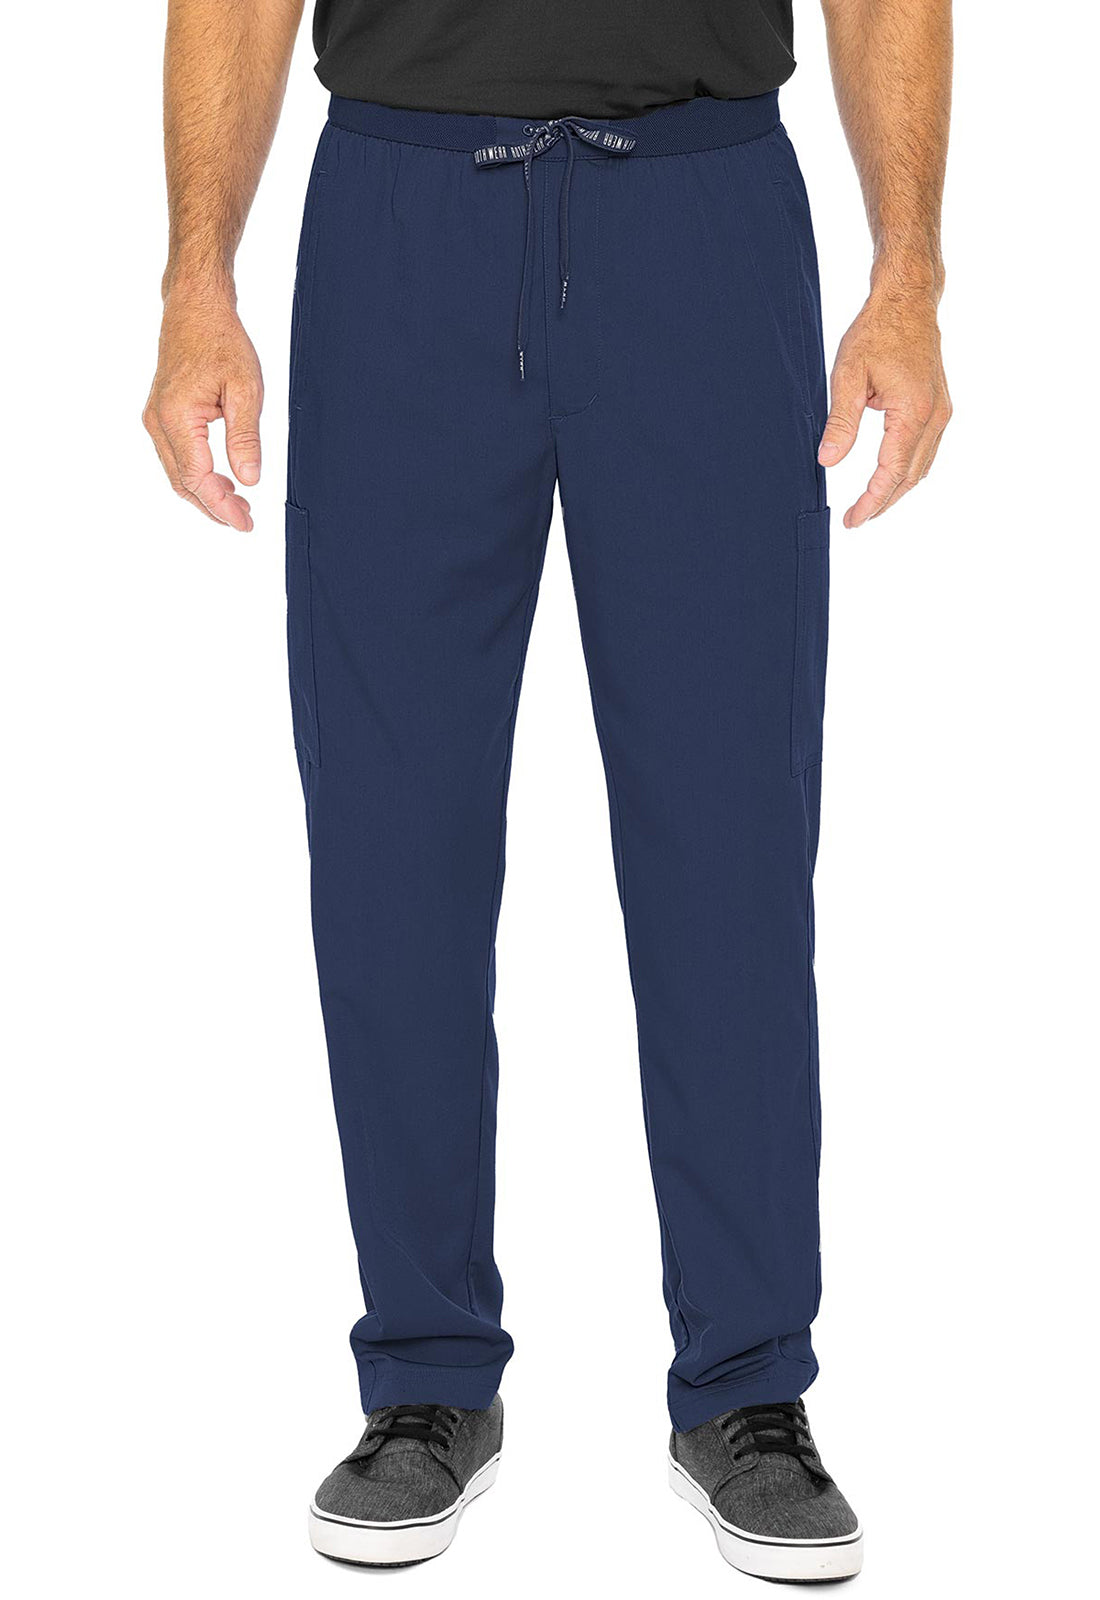 Med Couture Rothwear Touch Tall Mens Hutton Straight Leg Drawstring Pants